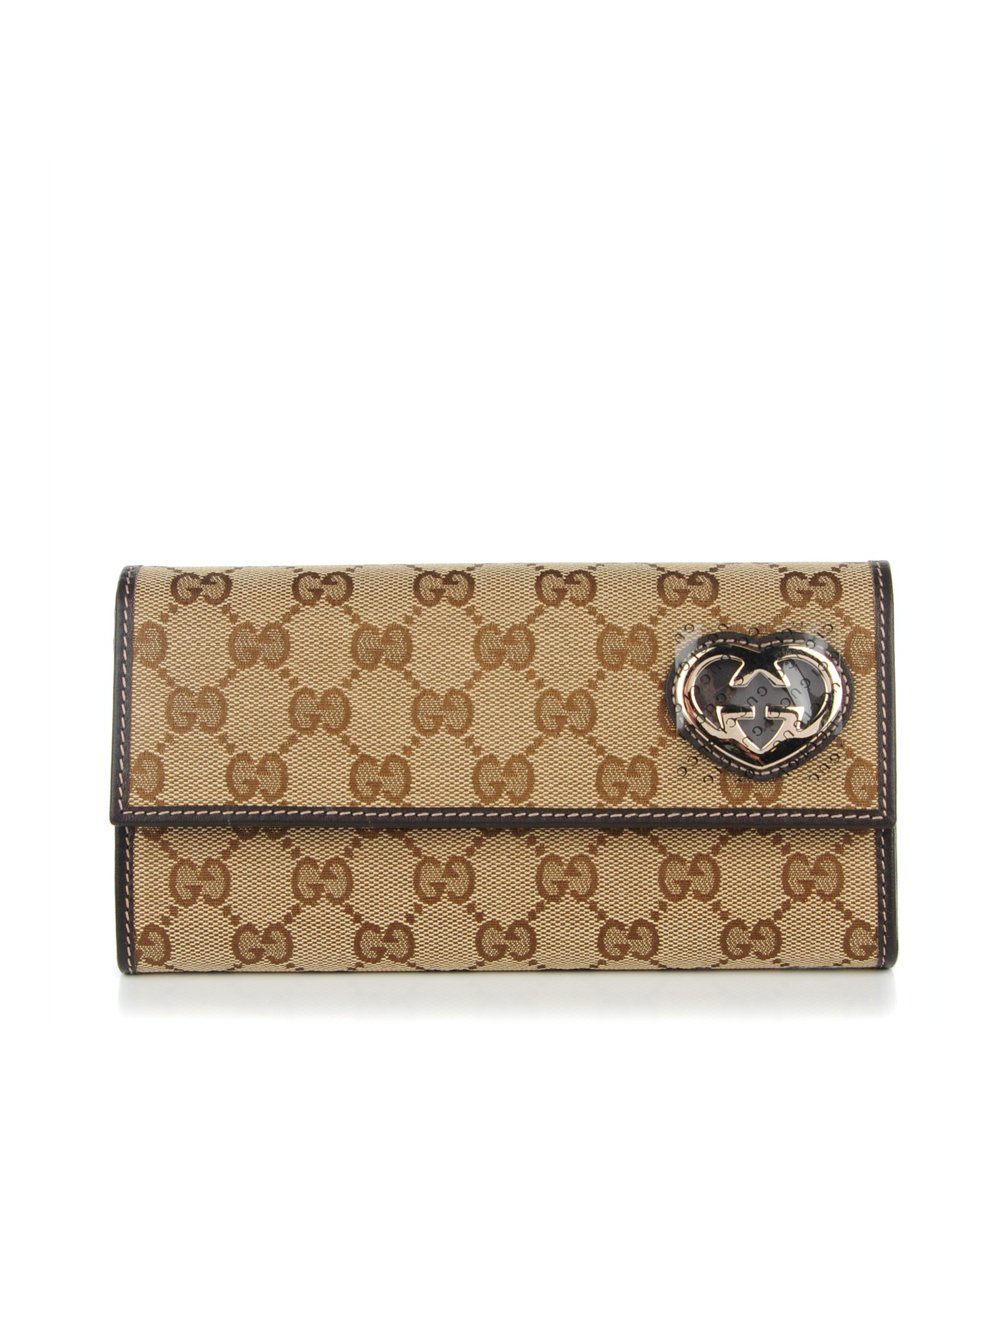 GUCCI Pre-Loved Lovely Heart Continental Purse - MAISONDEFASHION.COM